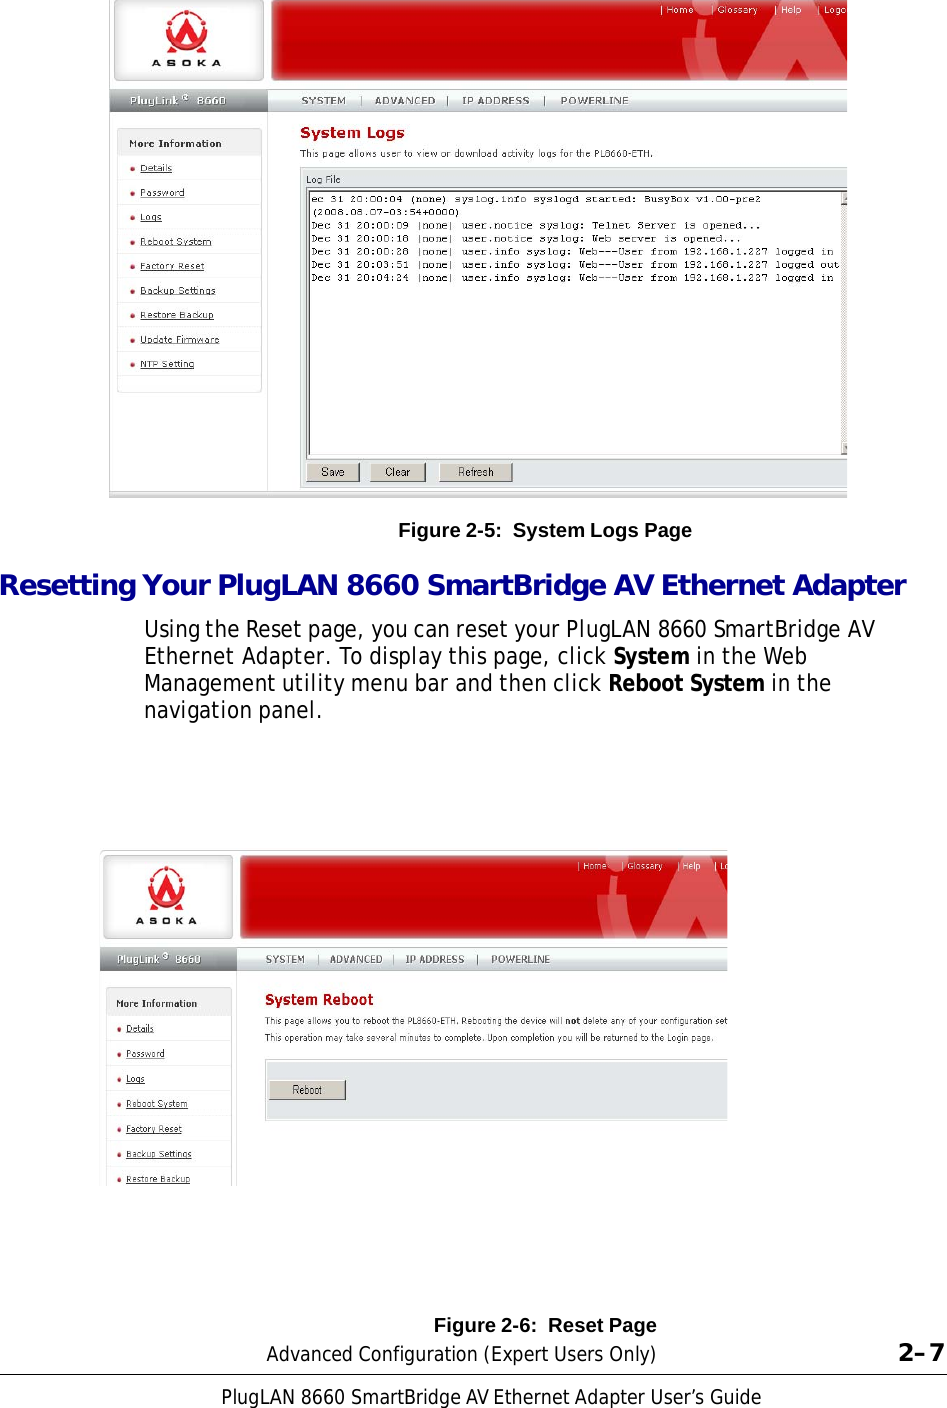 PlugLAN 8660 SmartBridge AV Ethernet Adapter User’s Guide                           Figure 2-5:  System Logs Page  Resetting Your PlugLAN 8660 SmartBridge AV Ethernet Adapter  Using the Reset page, you can reset your PlugLAN 8660 SmartBridge AV Ethernet Adapter. To display this page, click System in the Web Management utility menu bar and then click Reboot System in the navigation panel.                                Figure 2-6:  Reset Page Advanced Configuration (Expert Users Only)  2–7 